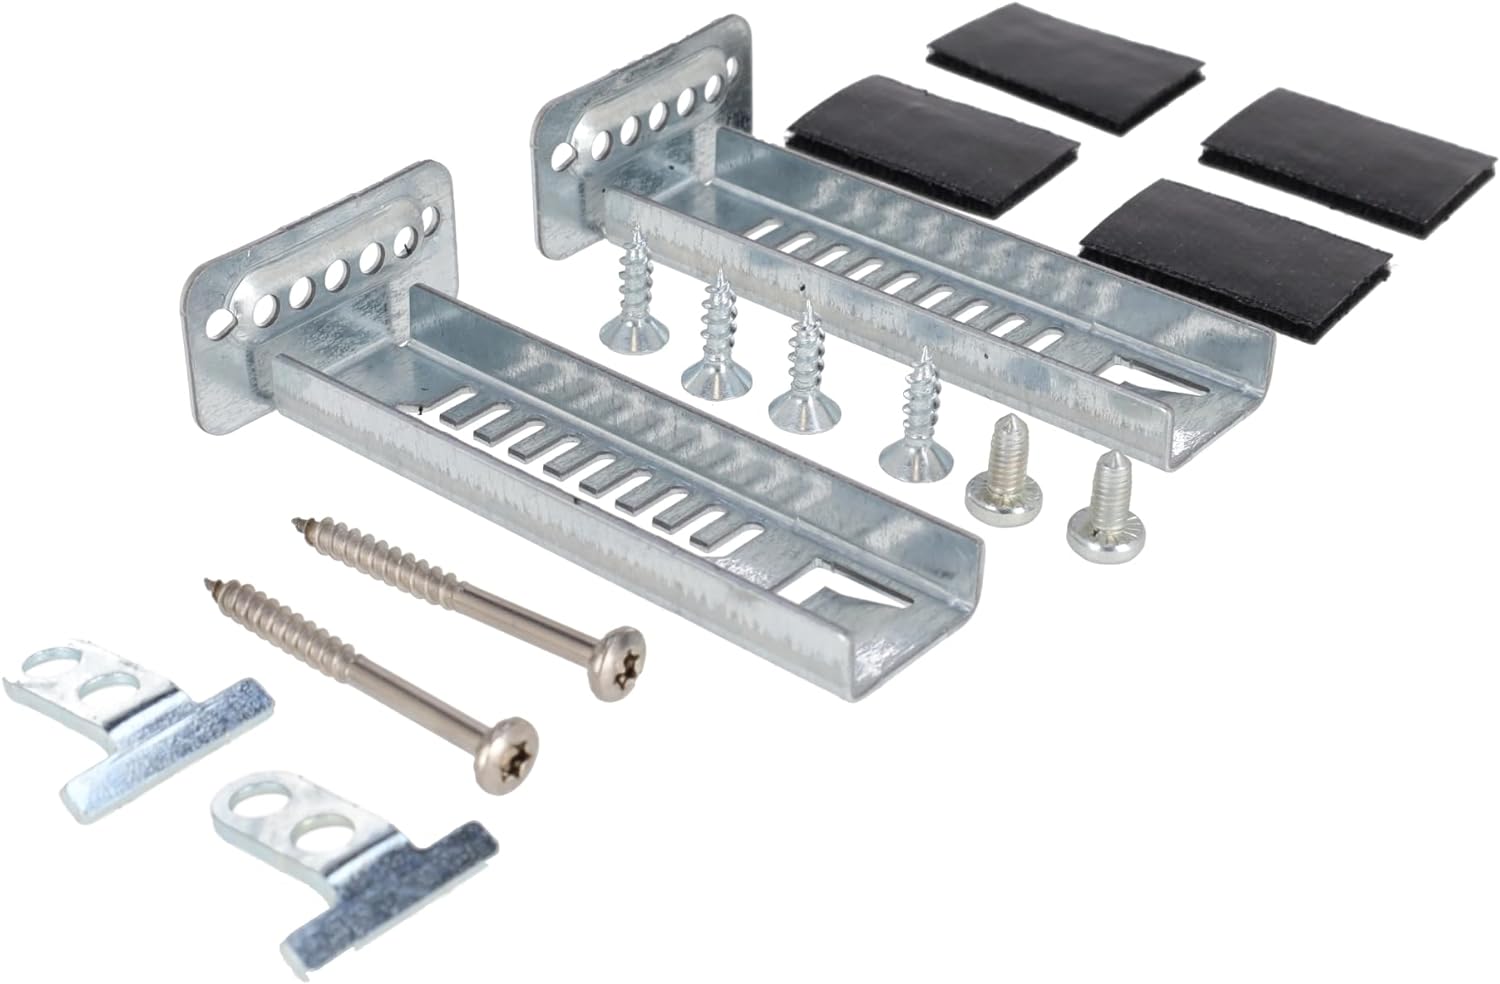 sparefixd Integrated Door Mounting Kit to Fit Gorenje Dishwasher - Amazing Gadgets Outlet